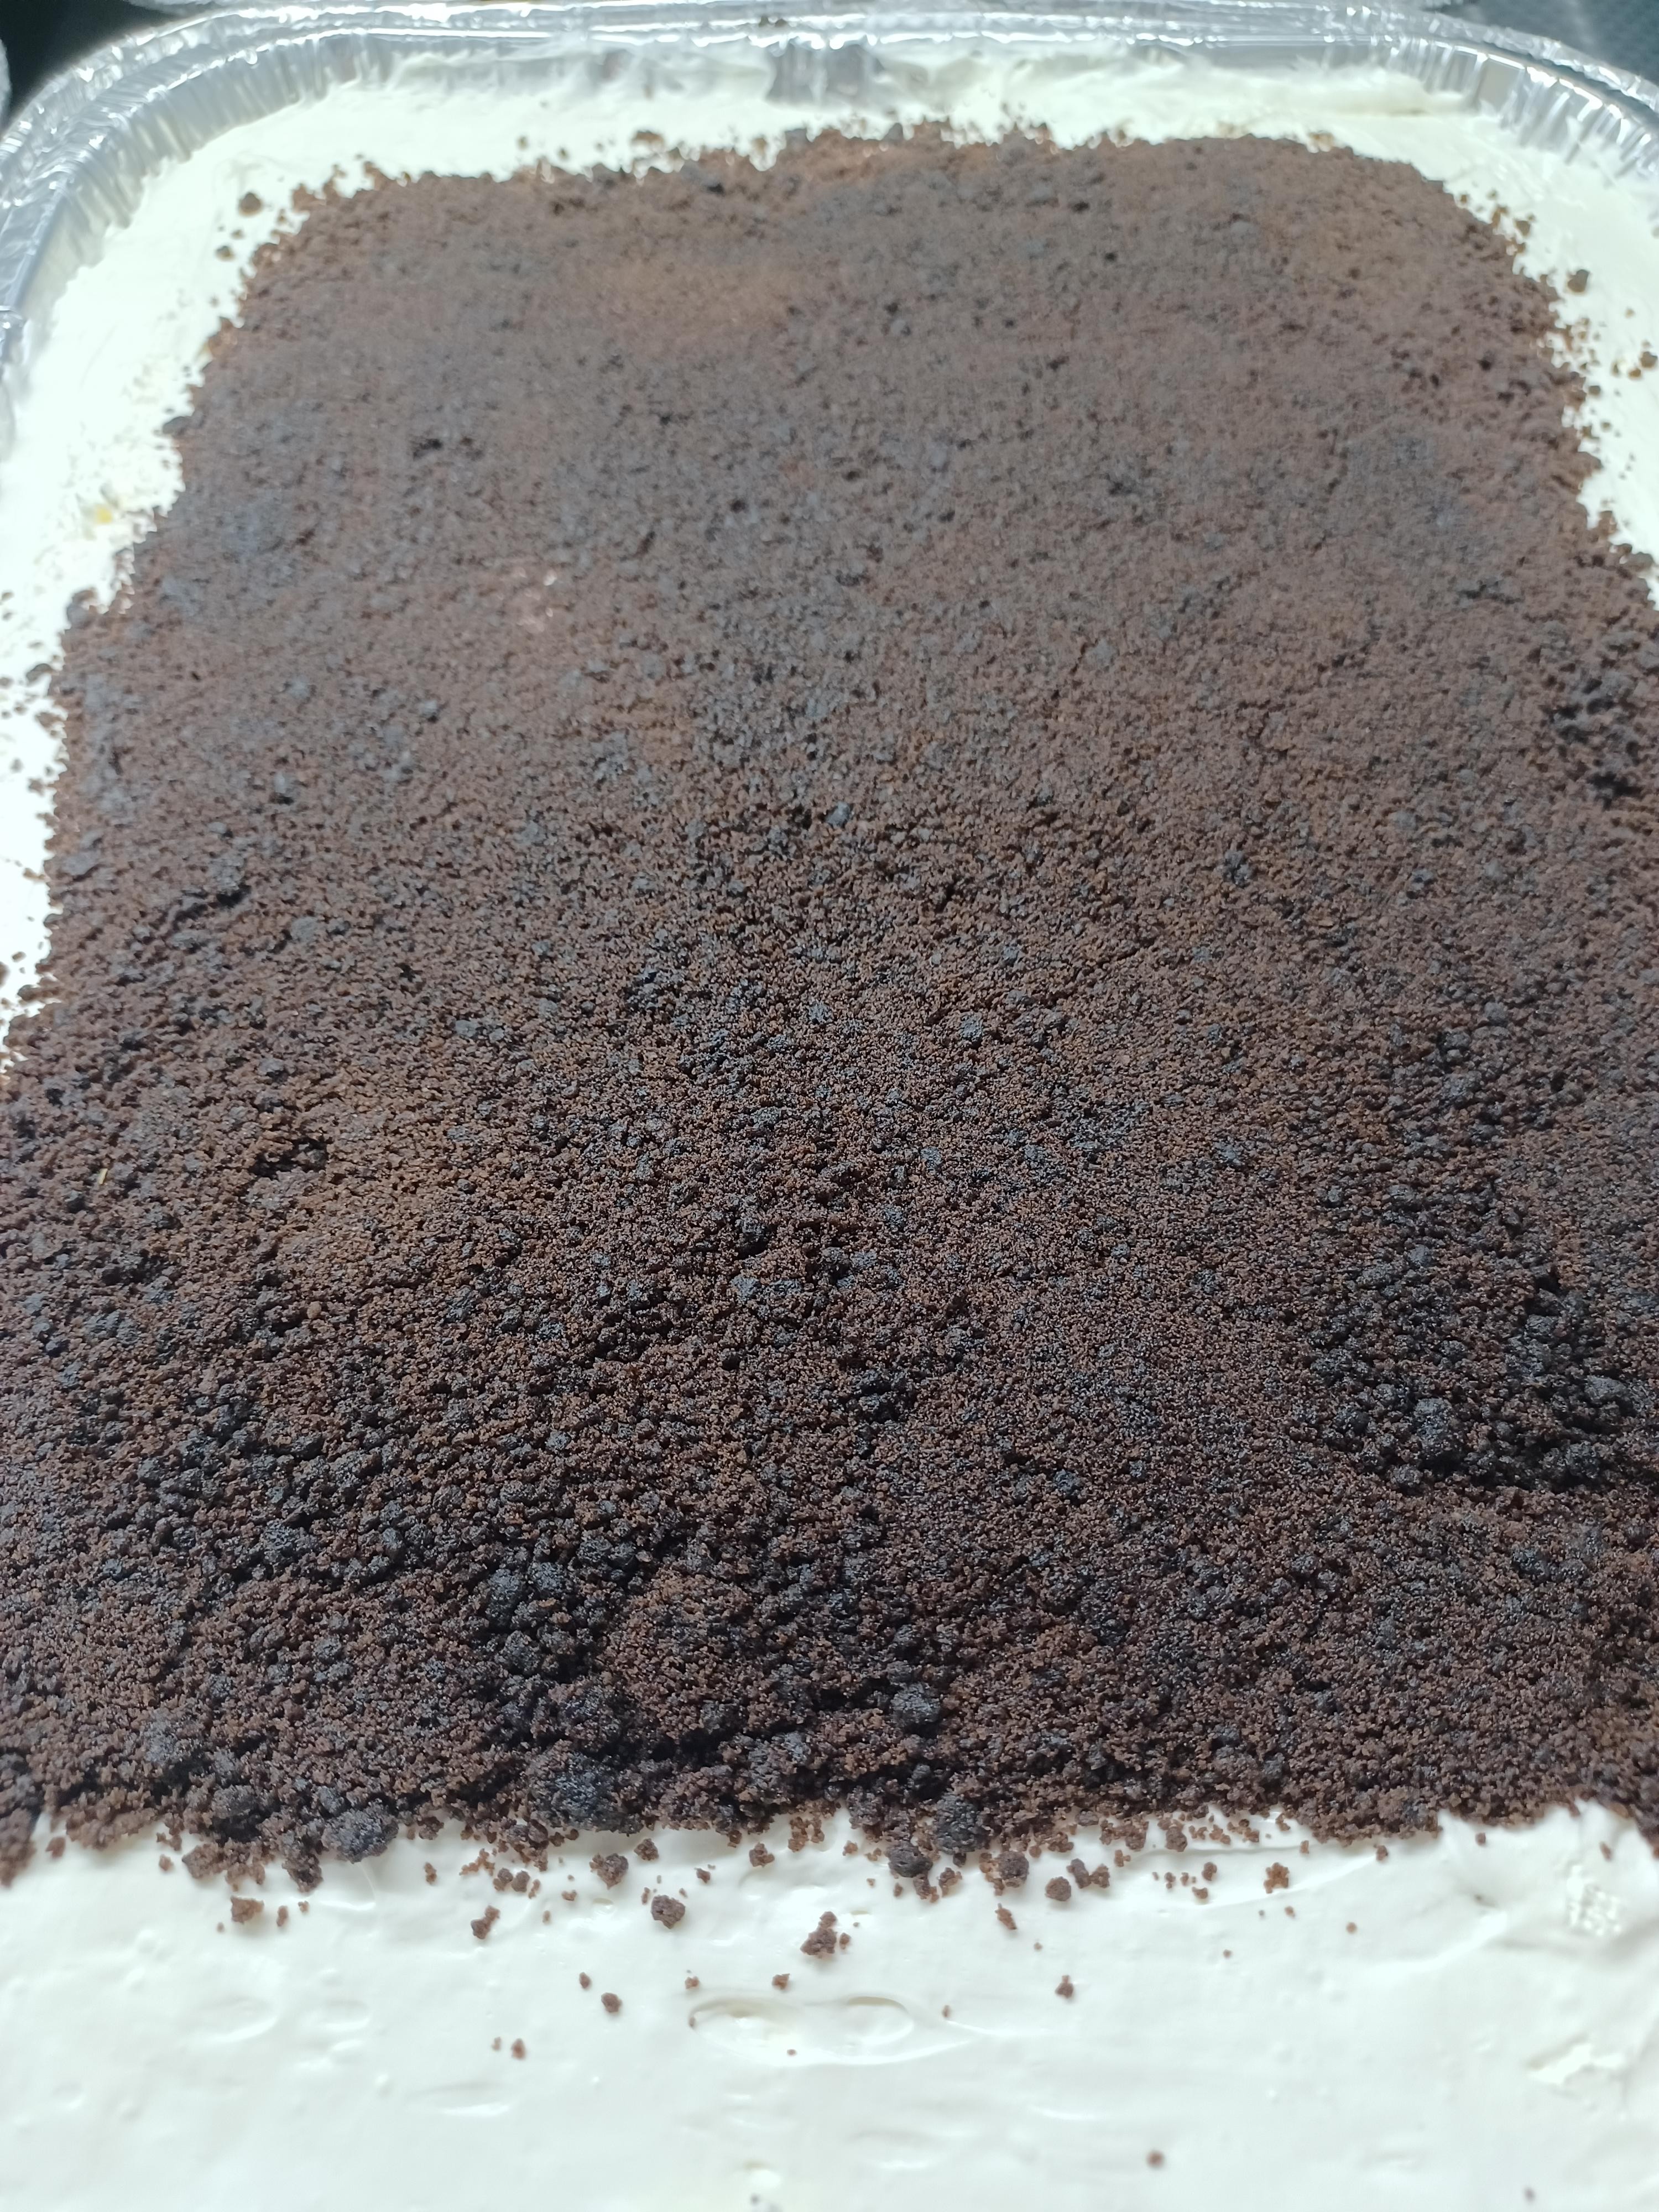 Dirt pudding/brownie torte